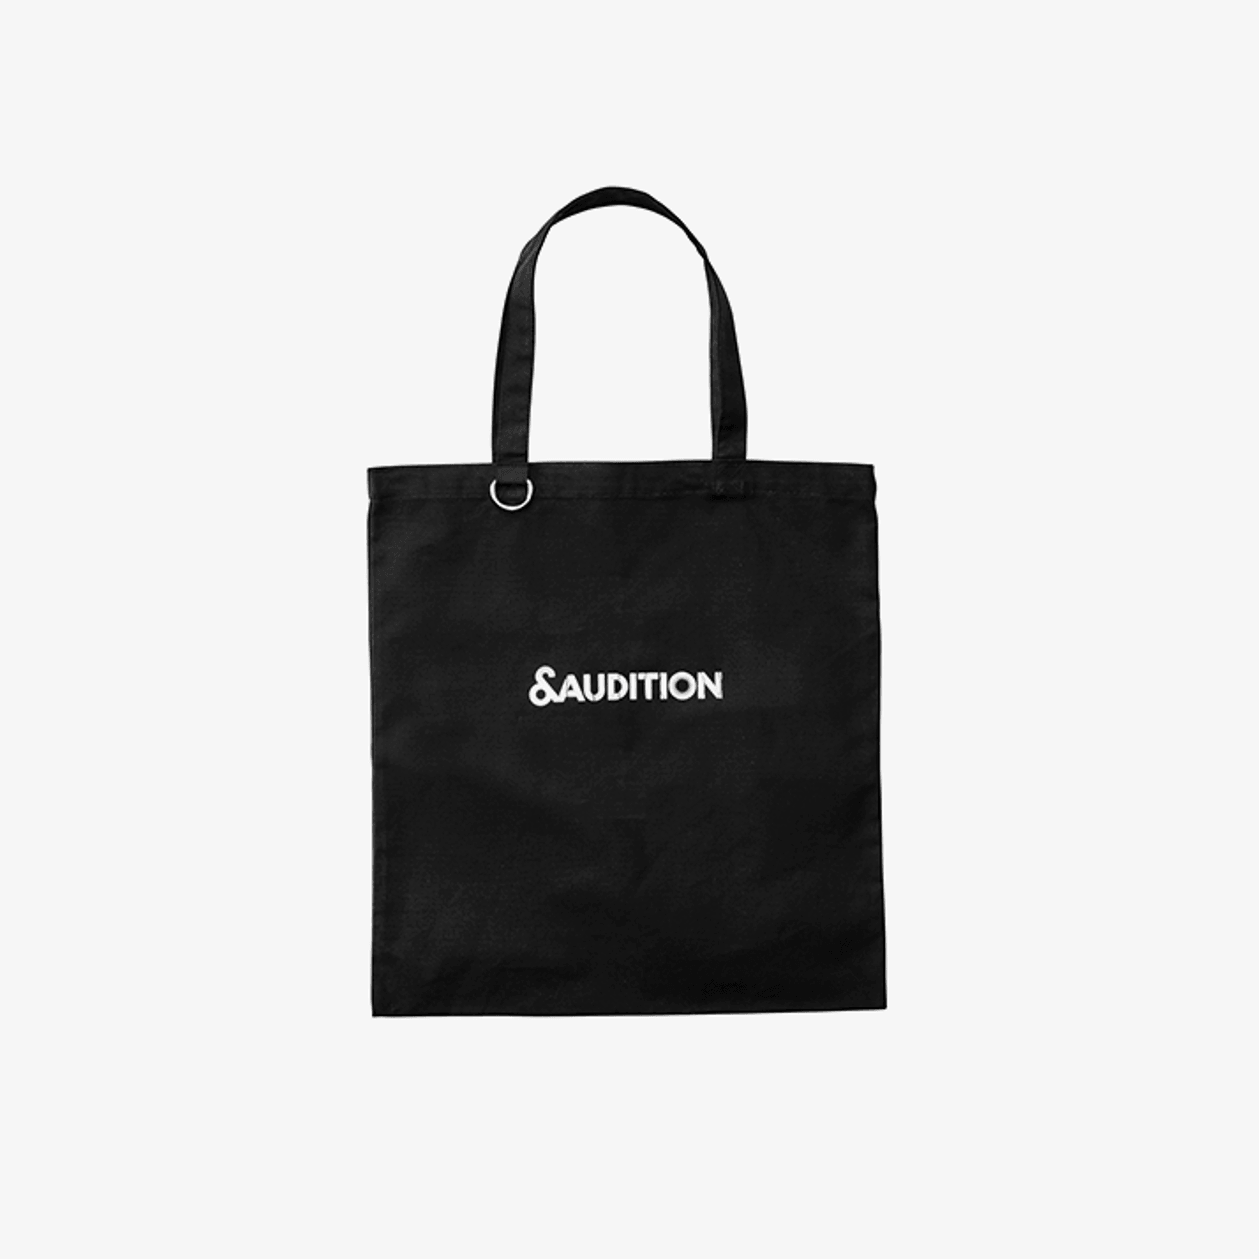 &AUDITION Tote Bag